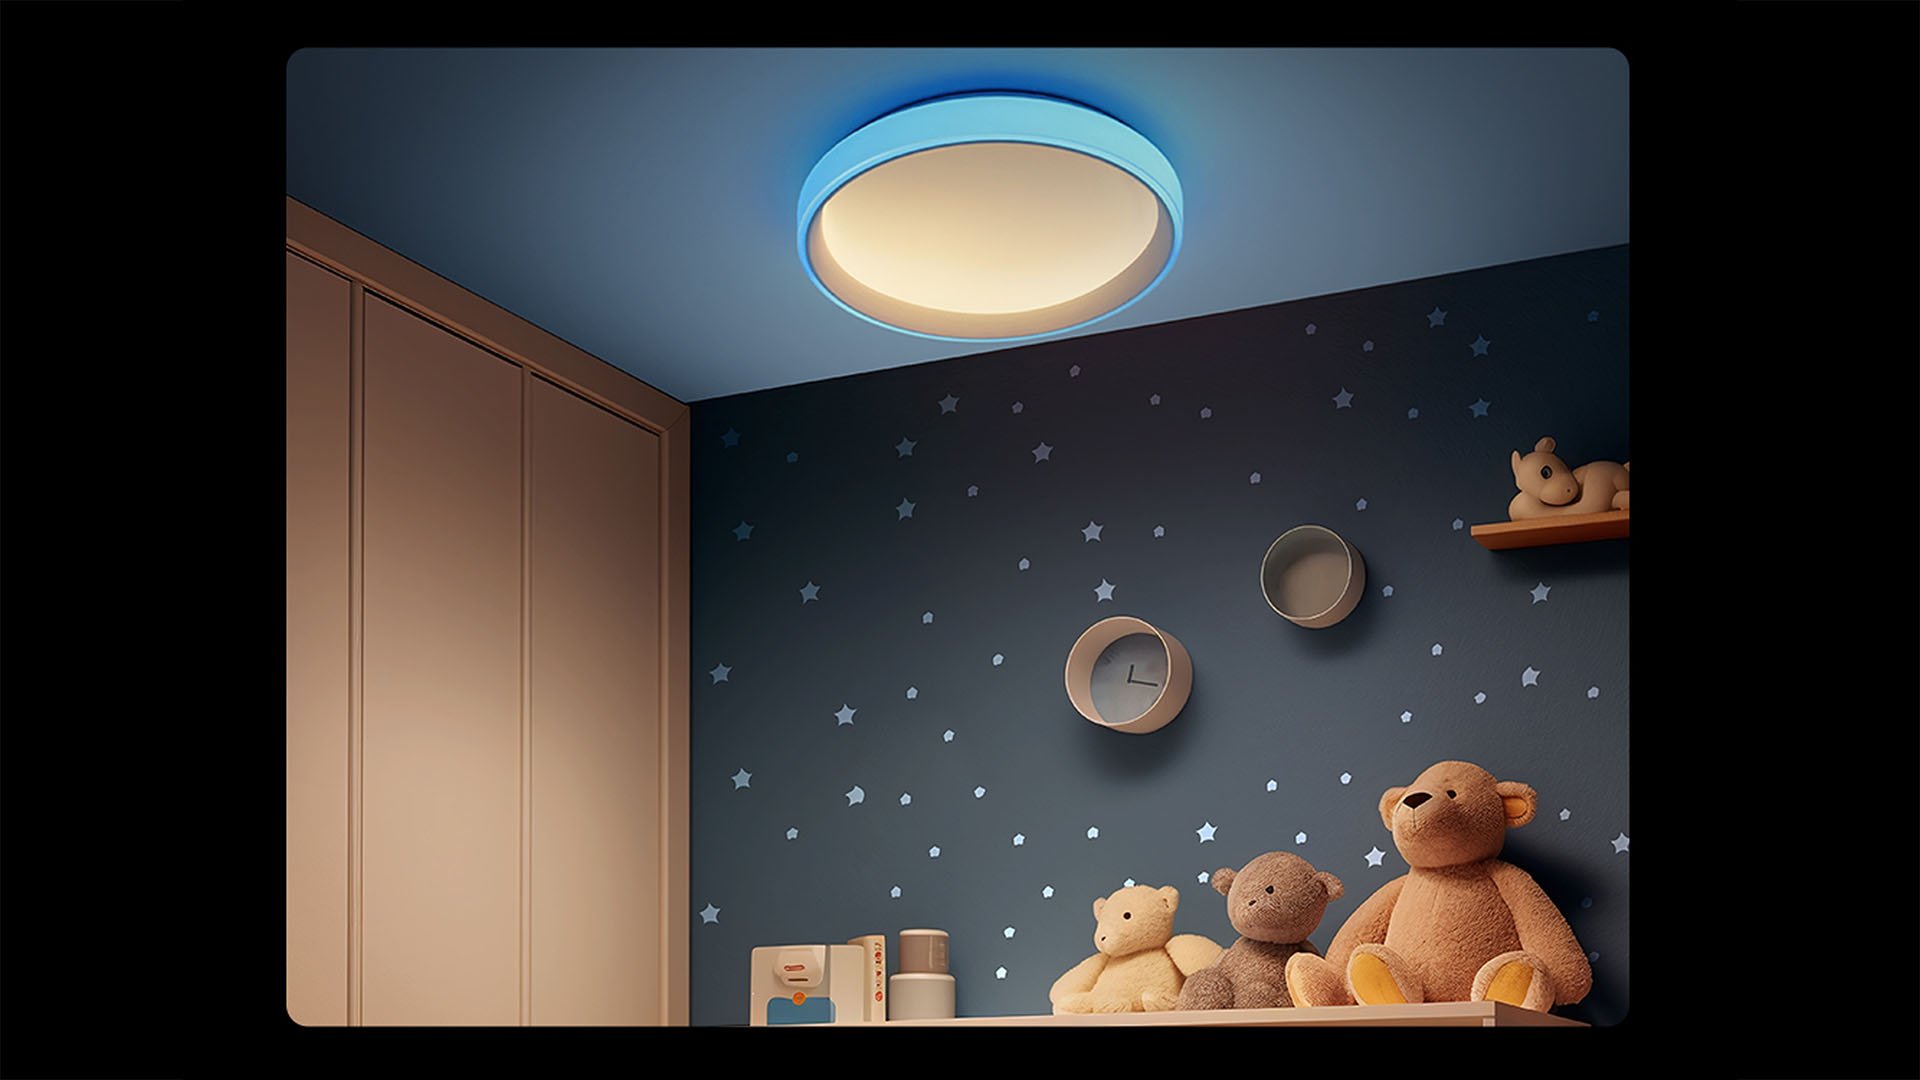 Aqara T1 Symphony Ceiling Light with HomeKit Support Featured